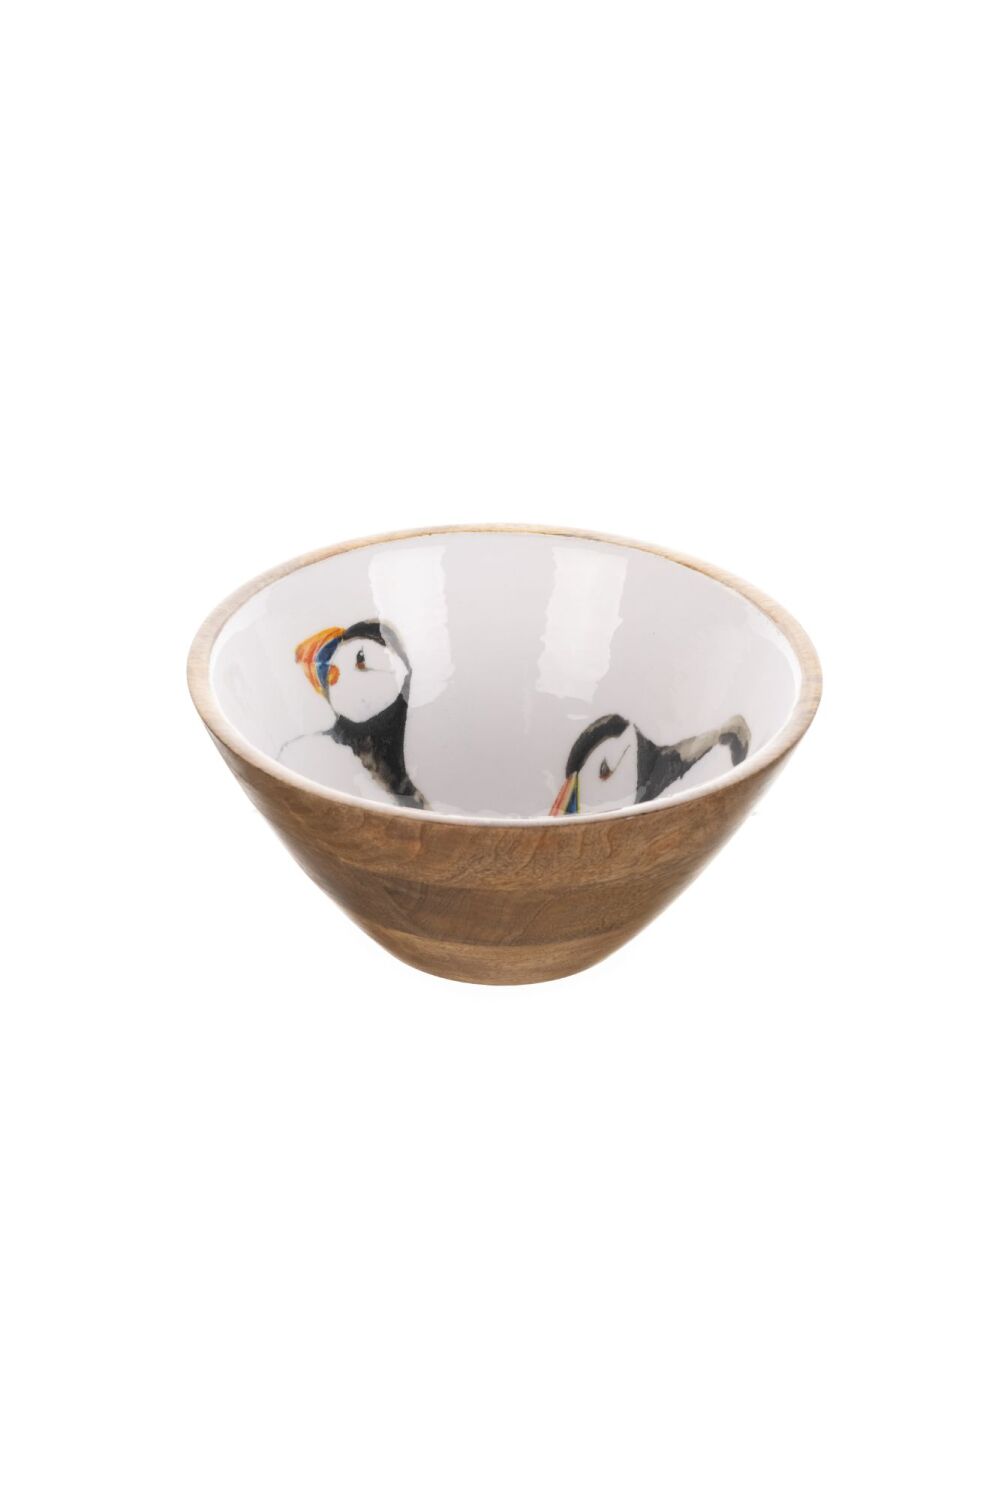 Puffin Wooden Salad Bowl